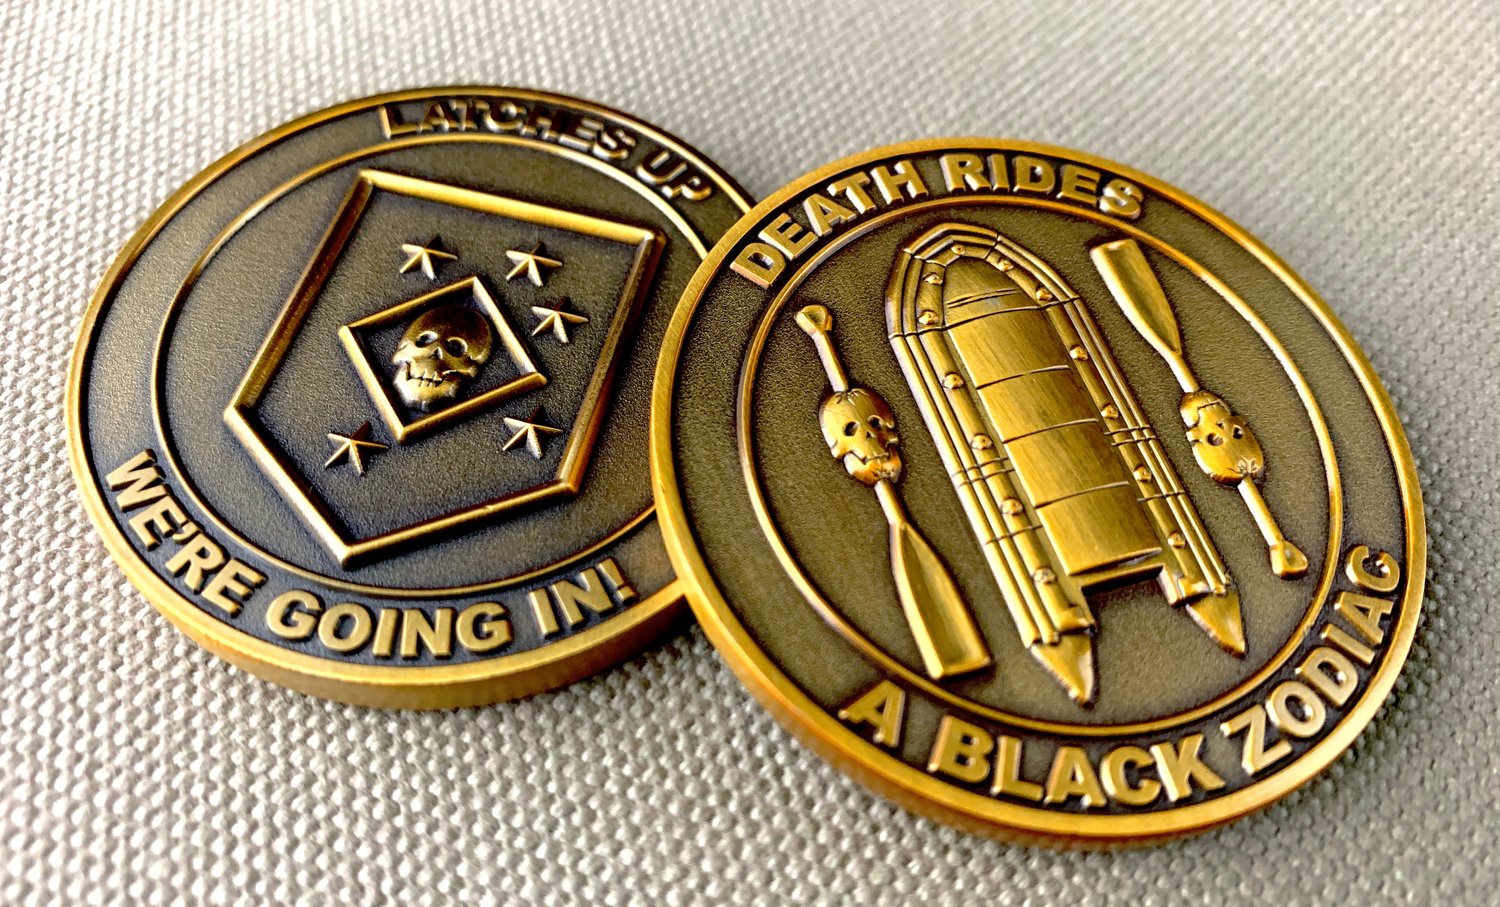 Image of “Latches Up” Challenge Coin